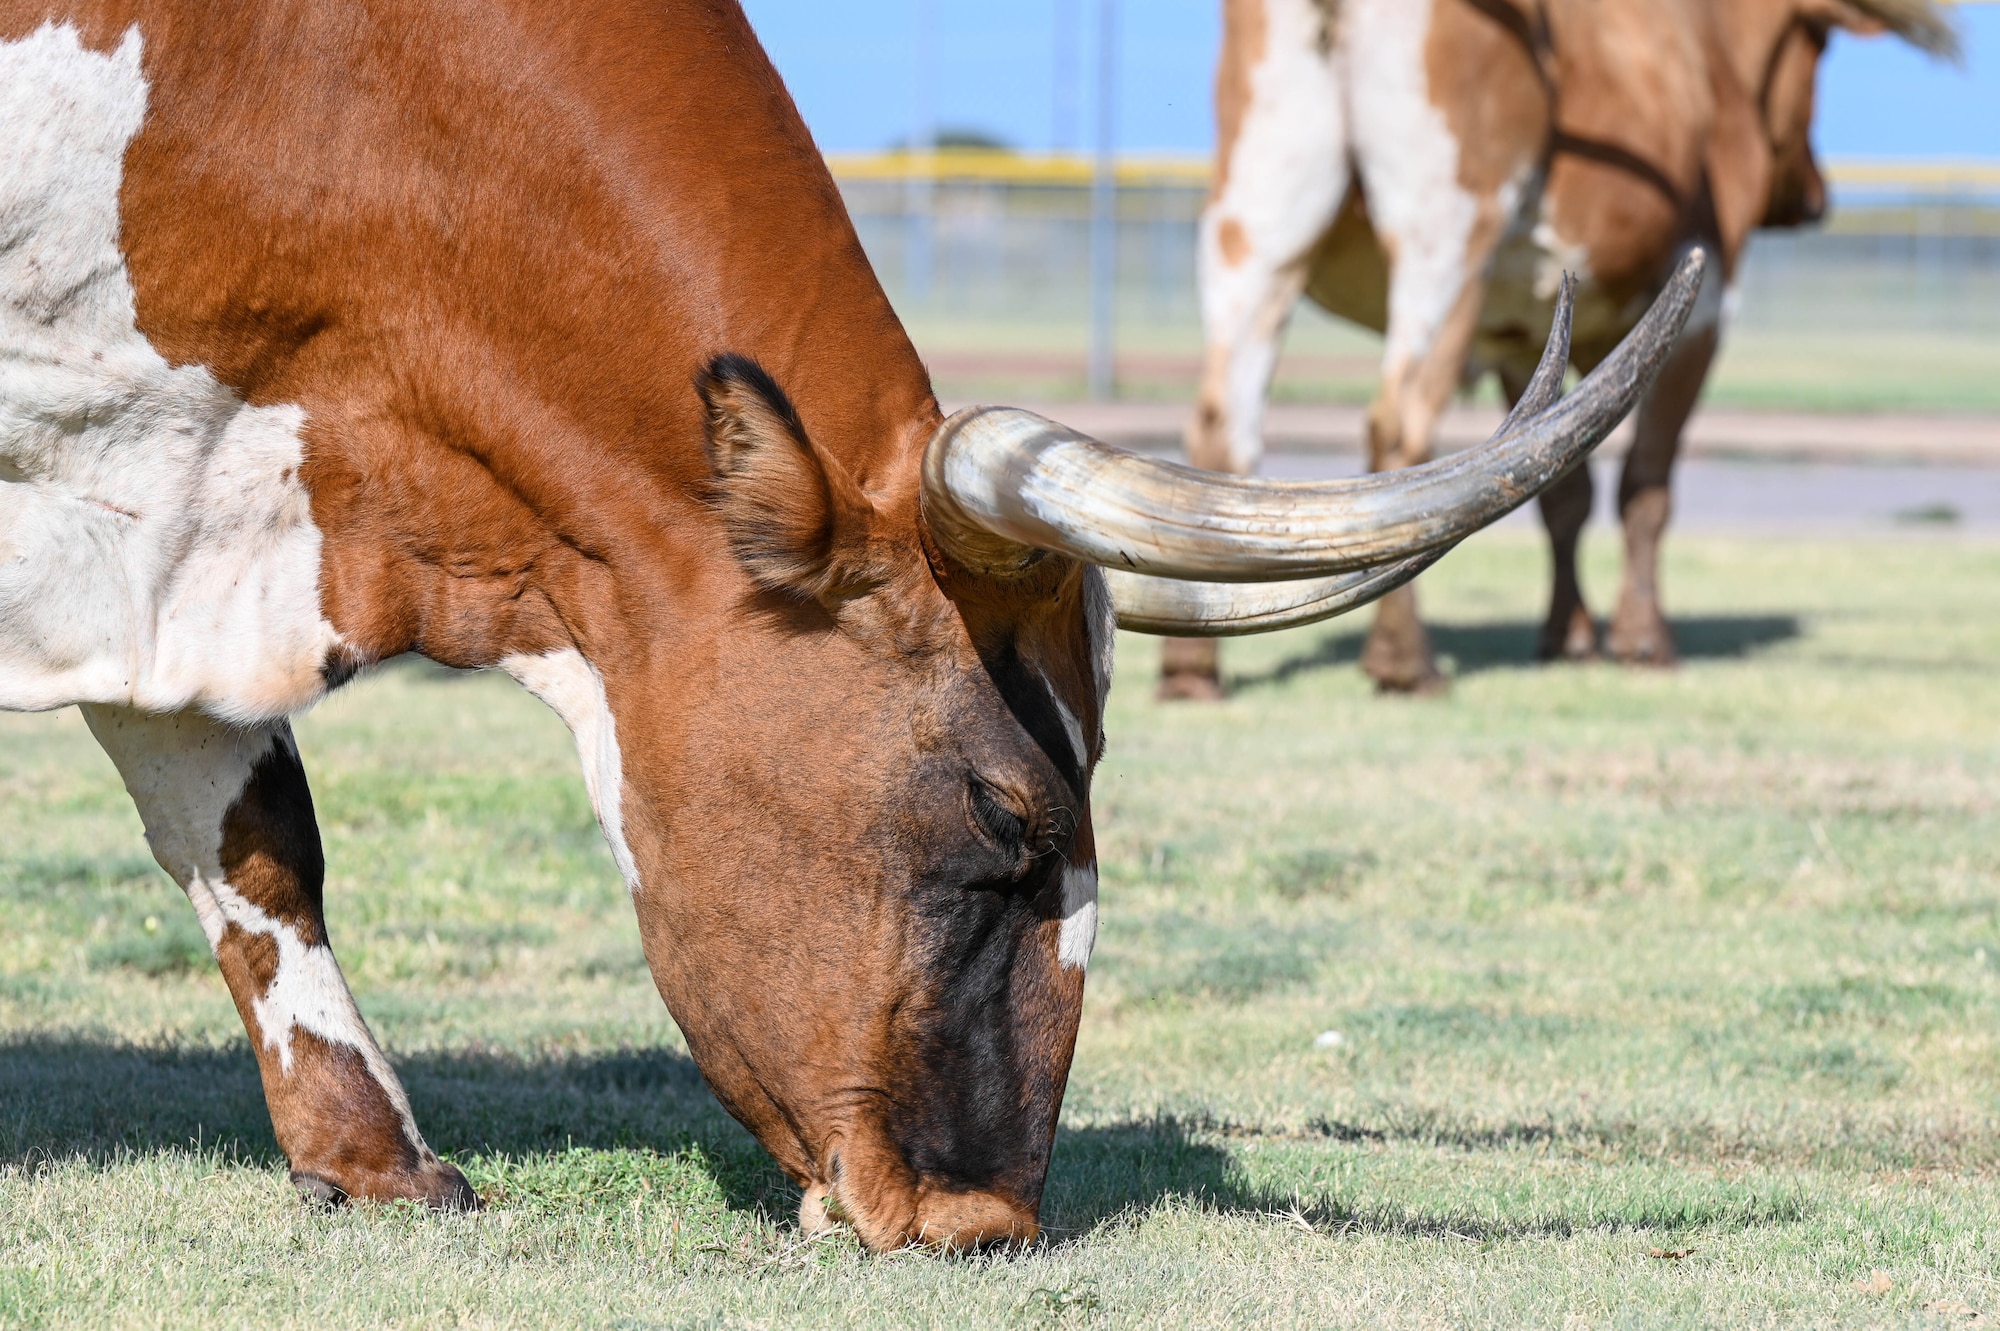 A longhorn grazes during the 25th Annual Cattle Drive at Altus Air Force Base (AFB), Oklahoma, Aug. 24, 2023. The cattle drive is unique to Altus AFB - the only military installation in the world to host this kind of event. (U.S. Air Force photo by Senior Airman Trenton Jancze)